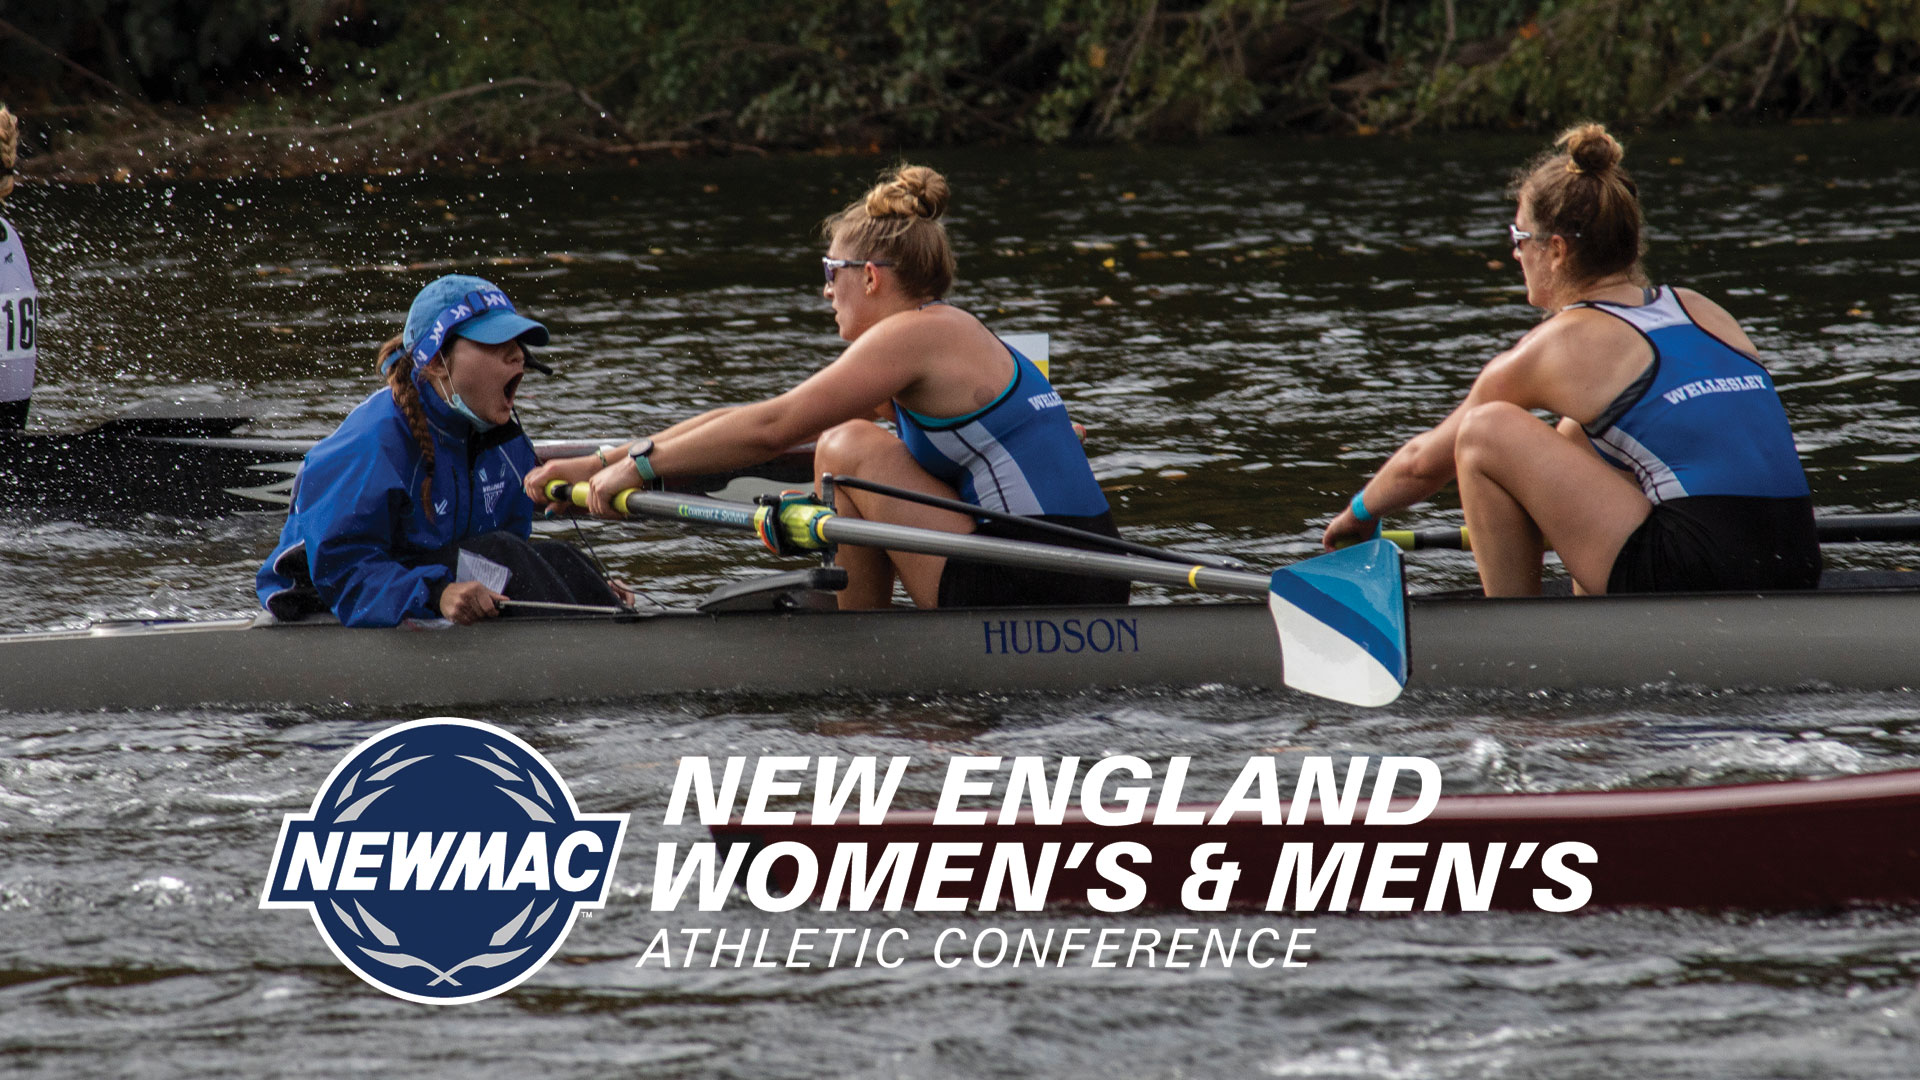 The Wellesley Varsity Eight has earned a second NEWMAC Rowing Boat of the Week honor.